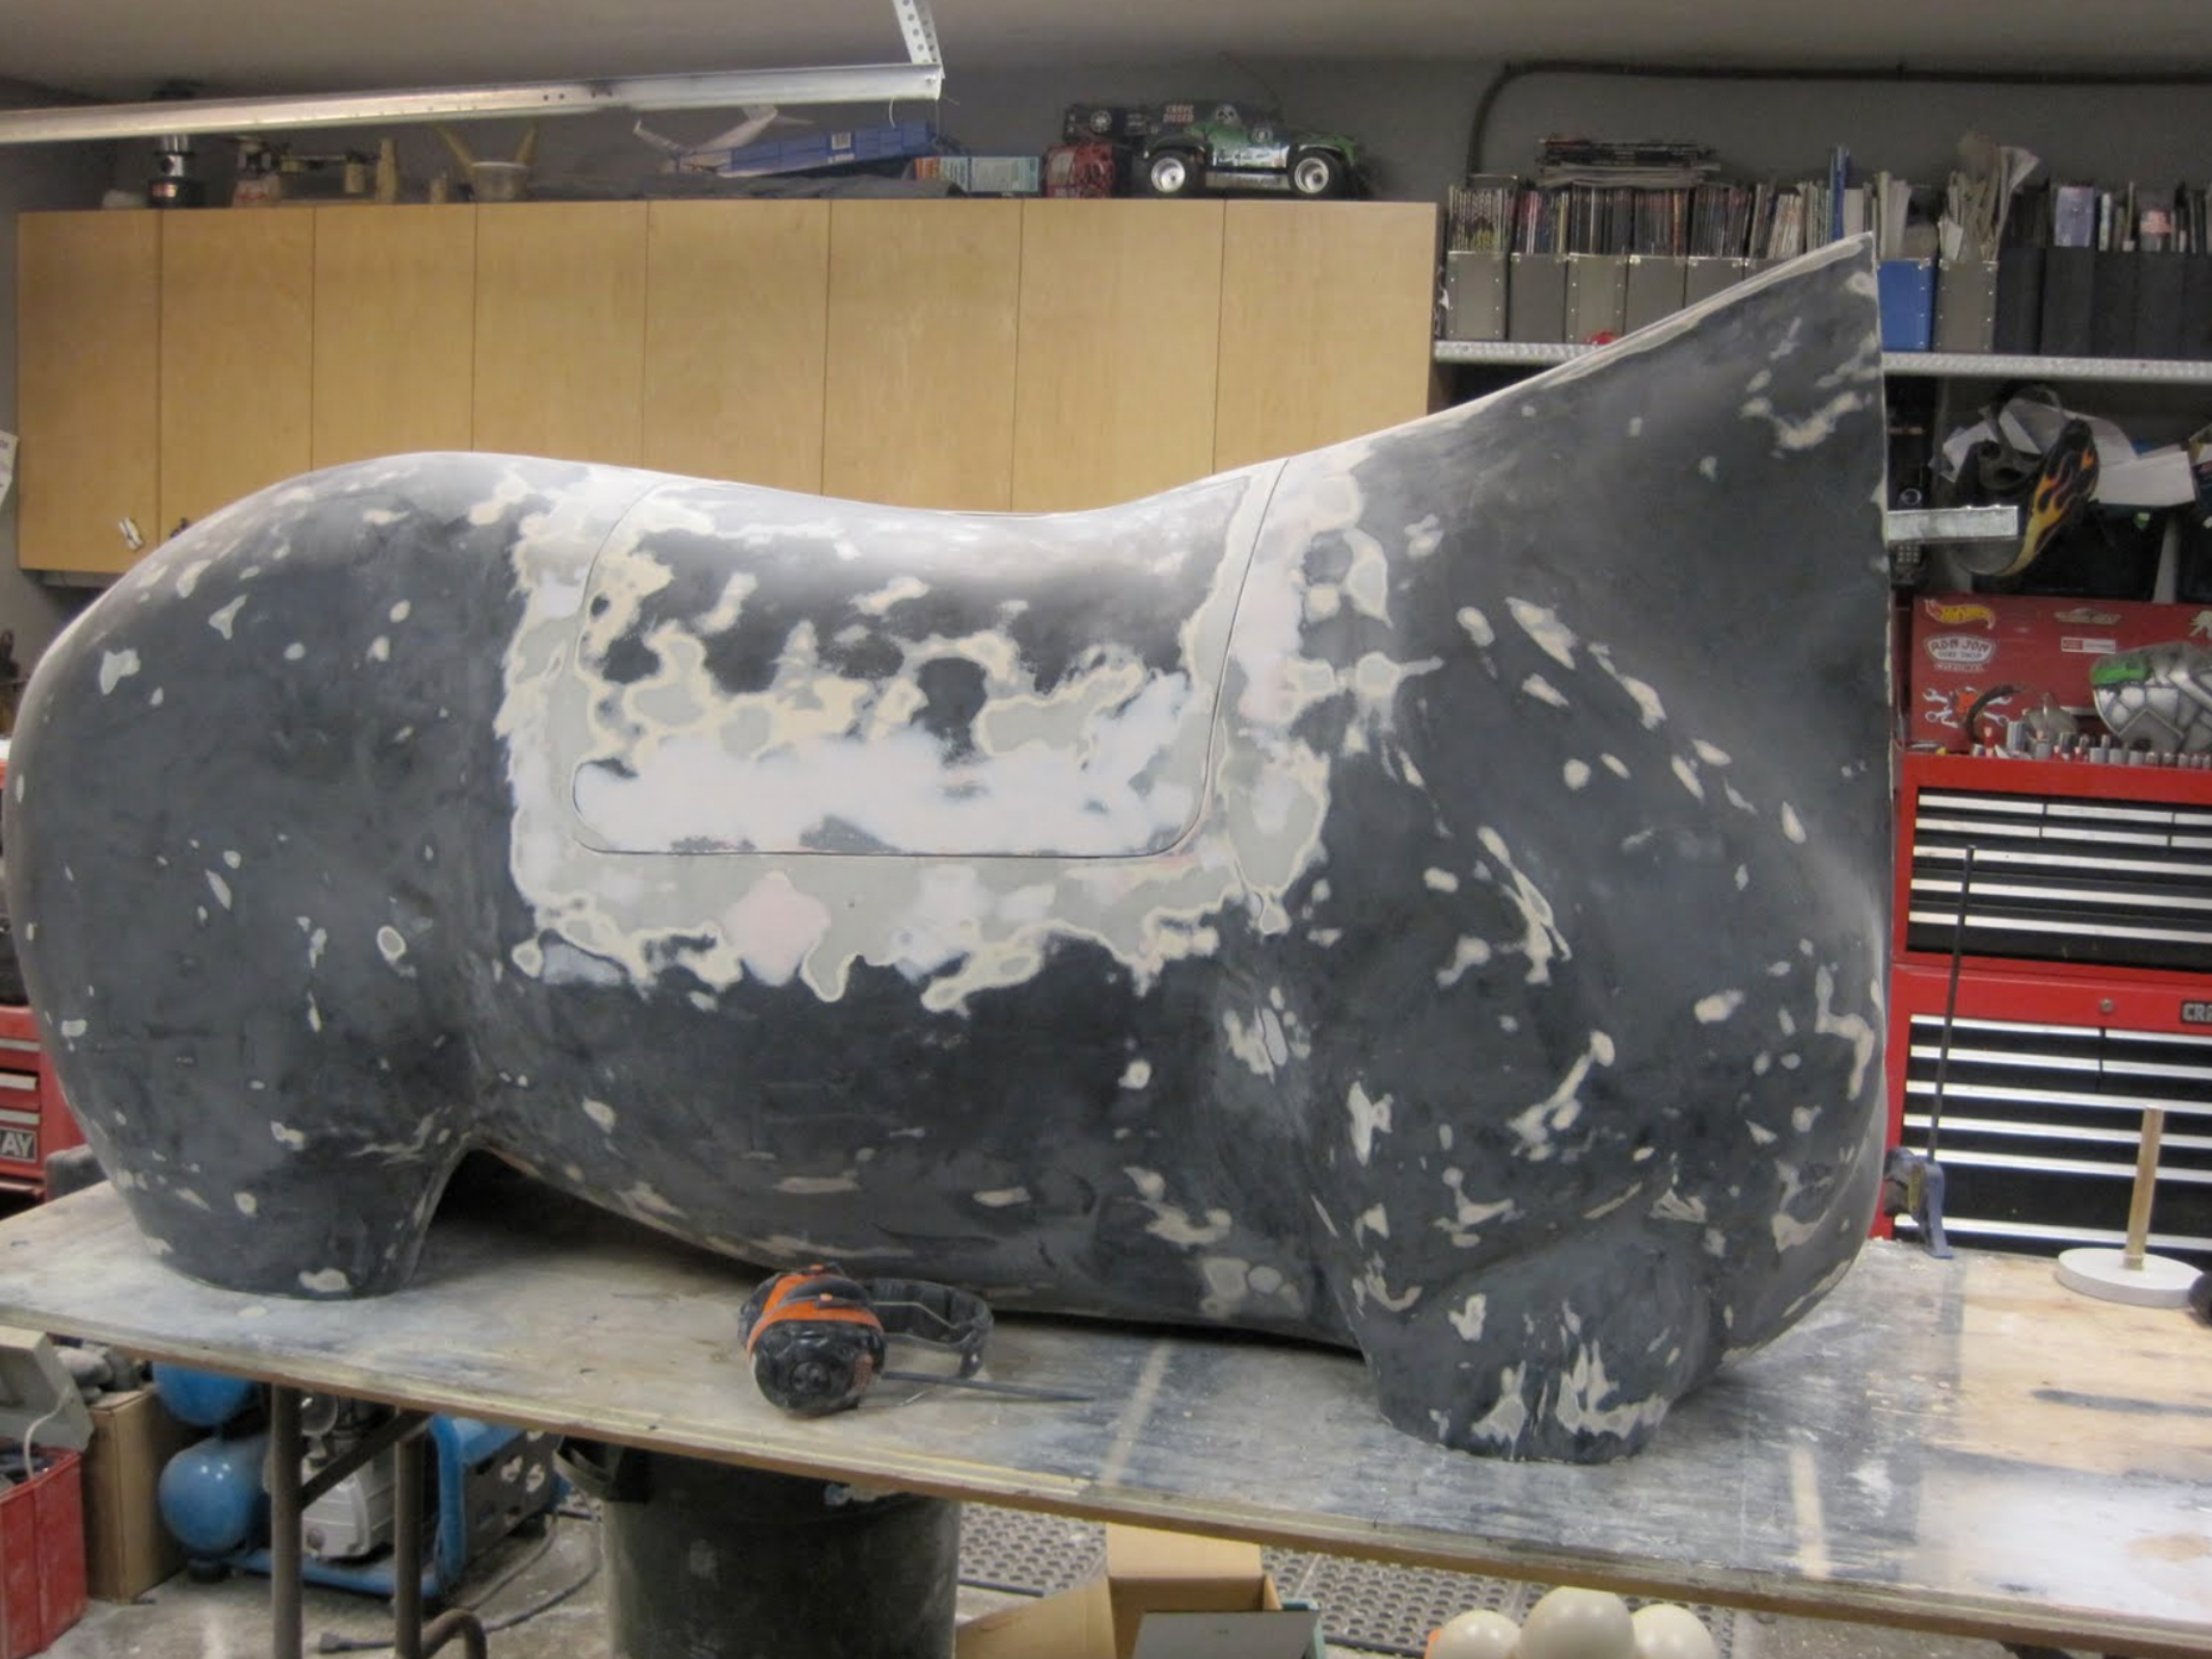  This photo shows the fiberglass horse with the access hatch cut into place. This will allow the instructors to place a real digestive tract into the unit to facilitate palpation. finished units will have a urethane tub to contain the organs, as well